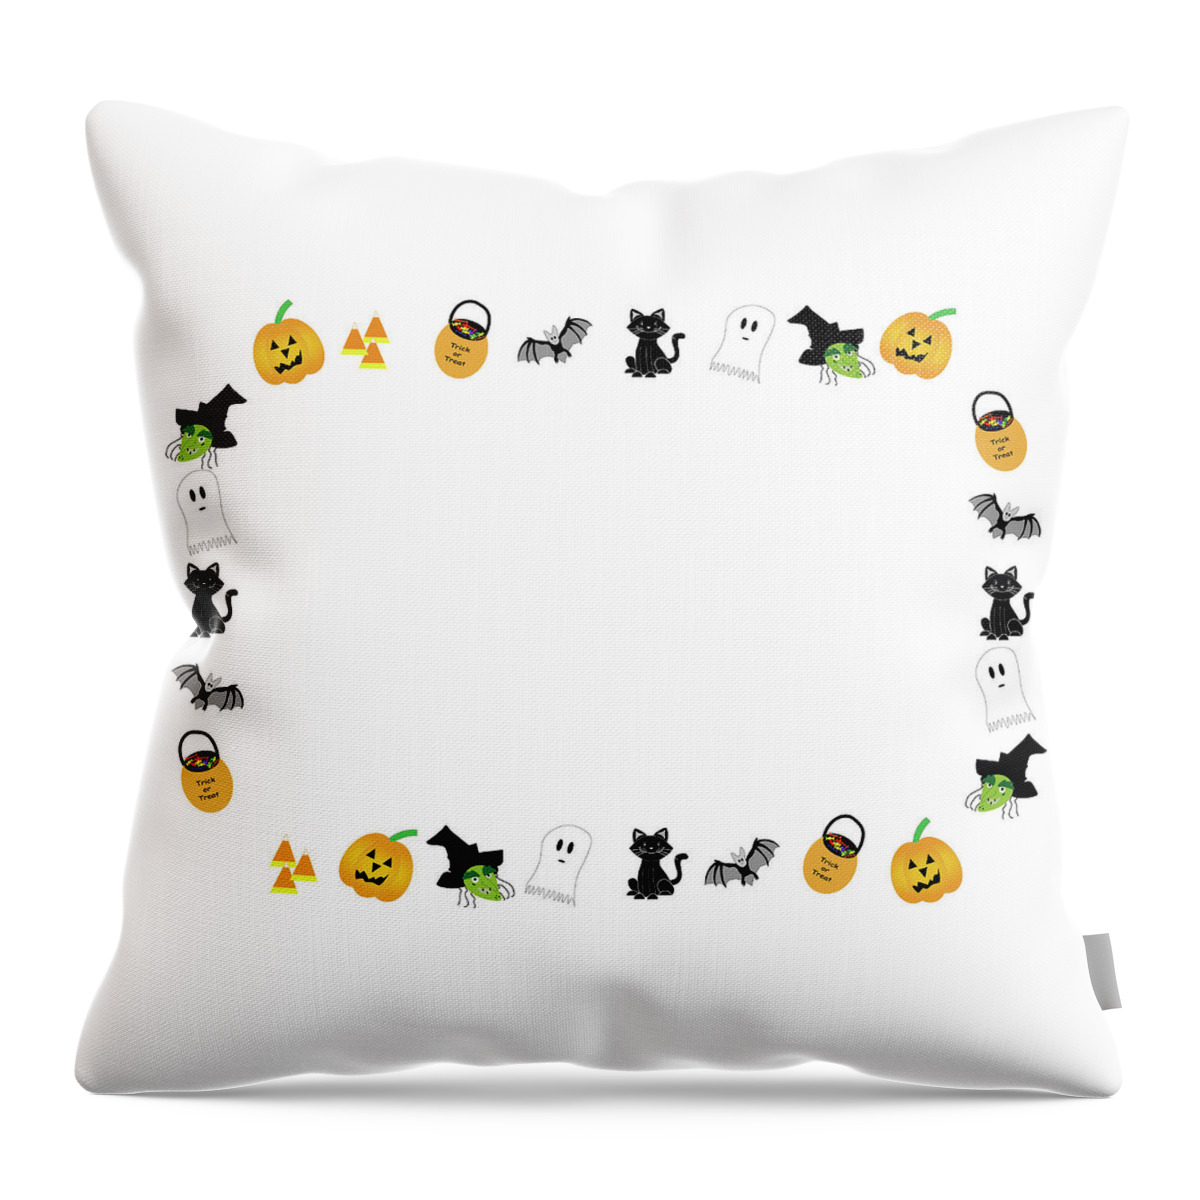 Illustration Throw Pillow featuring the photograph Illustrated Halloween Frame by Karen Foley